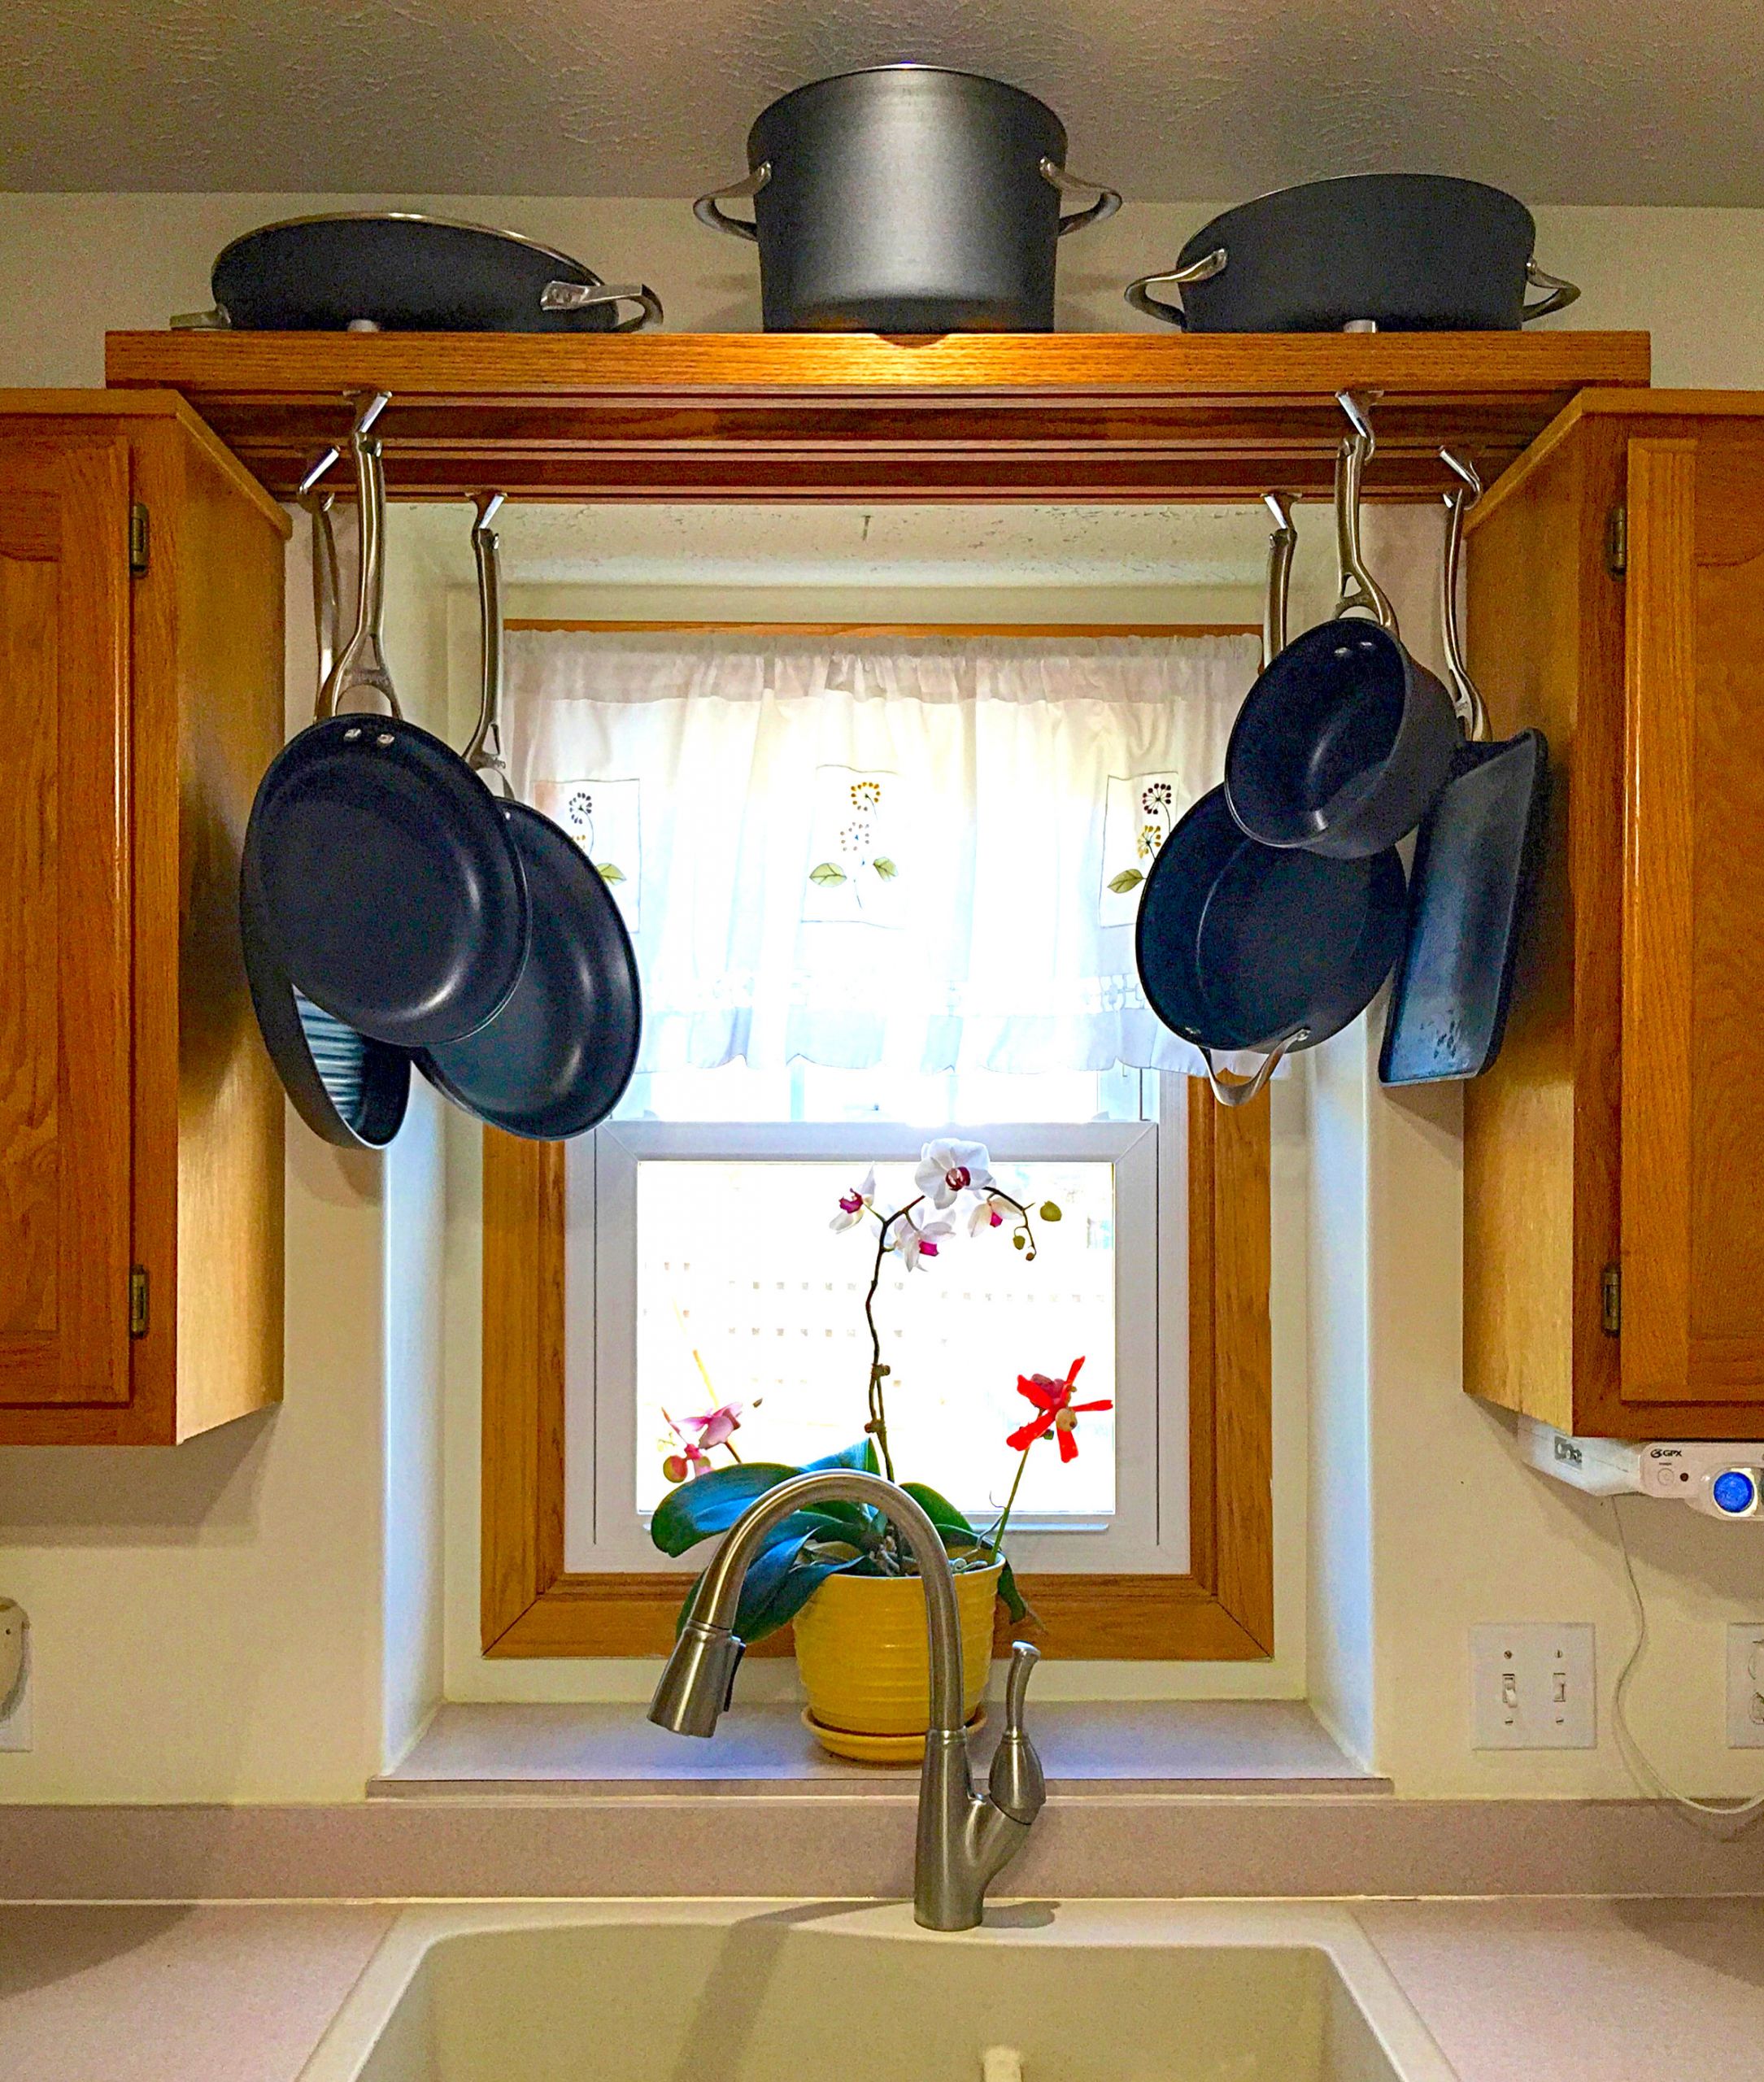 Pot Rack DIY
 Make use of space over the kitchen sink with this DIY pot